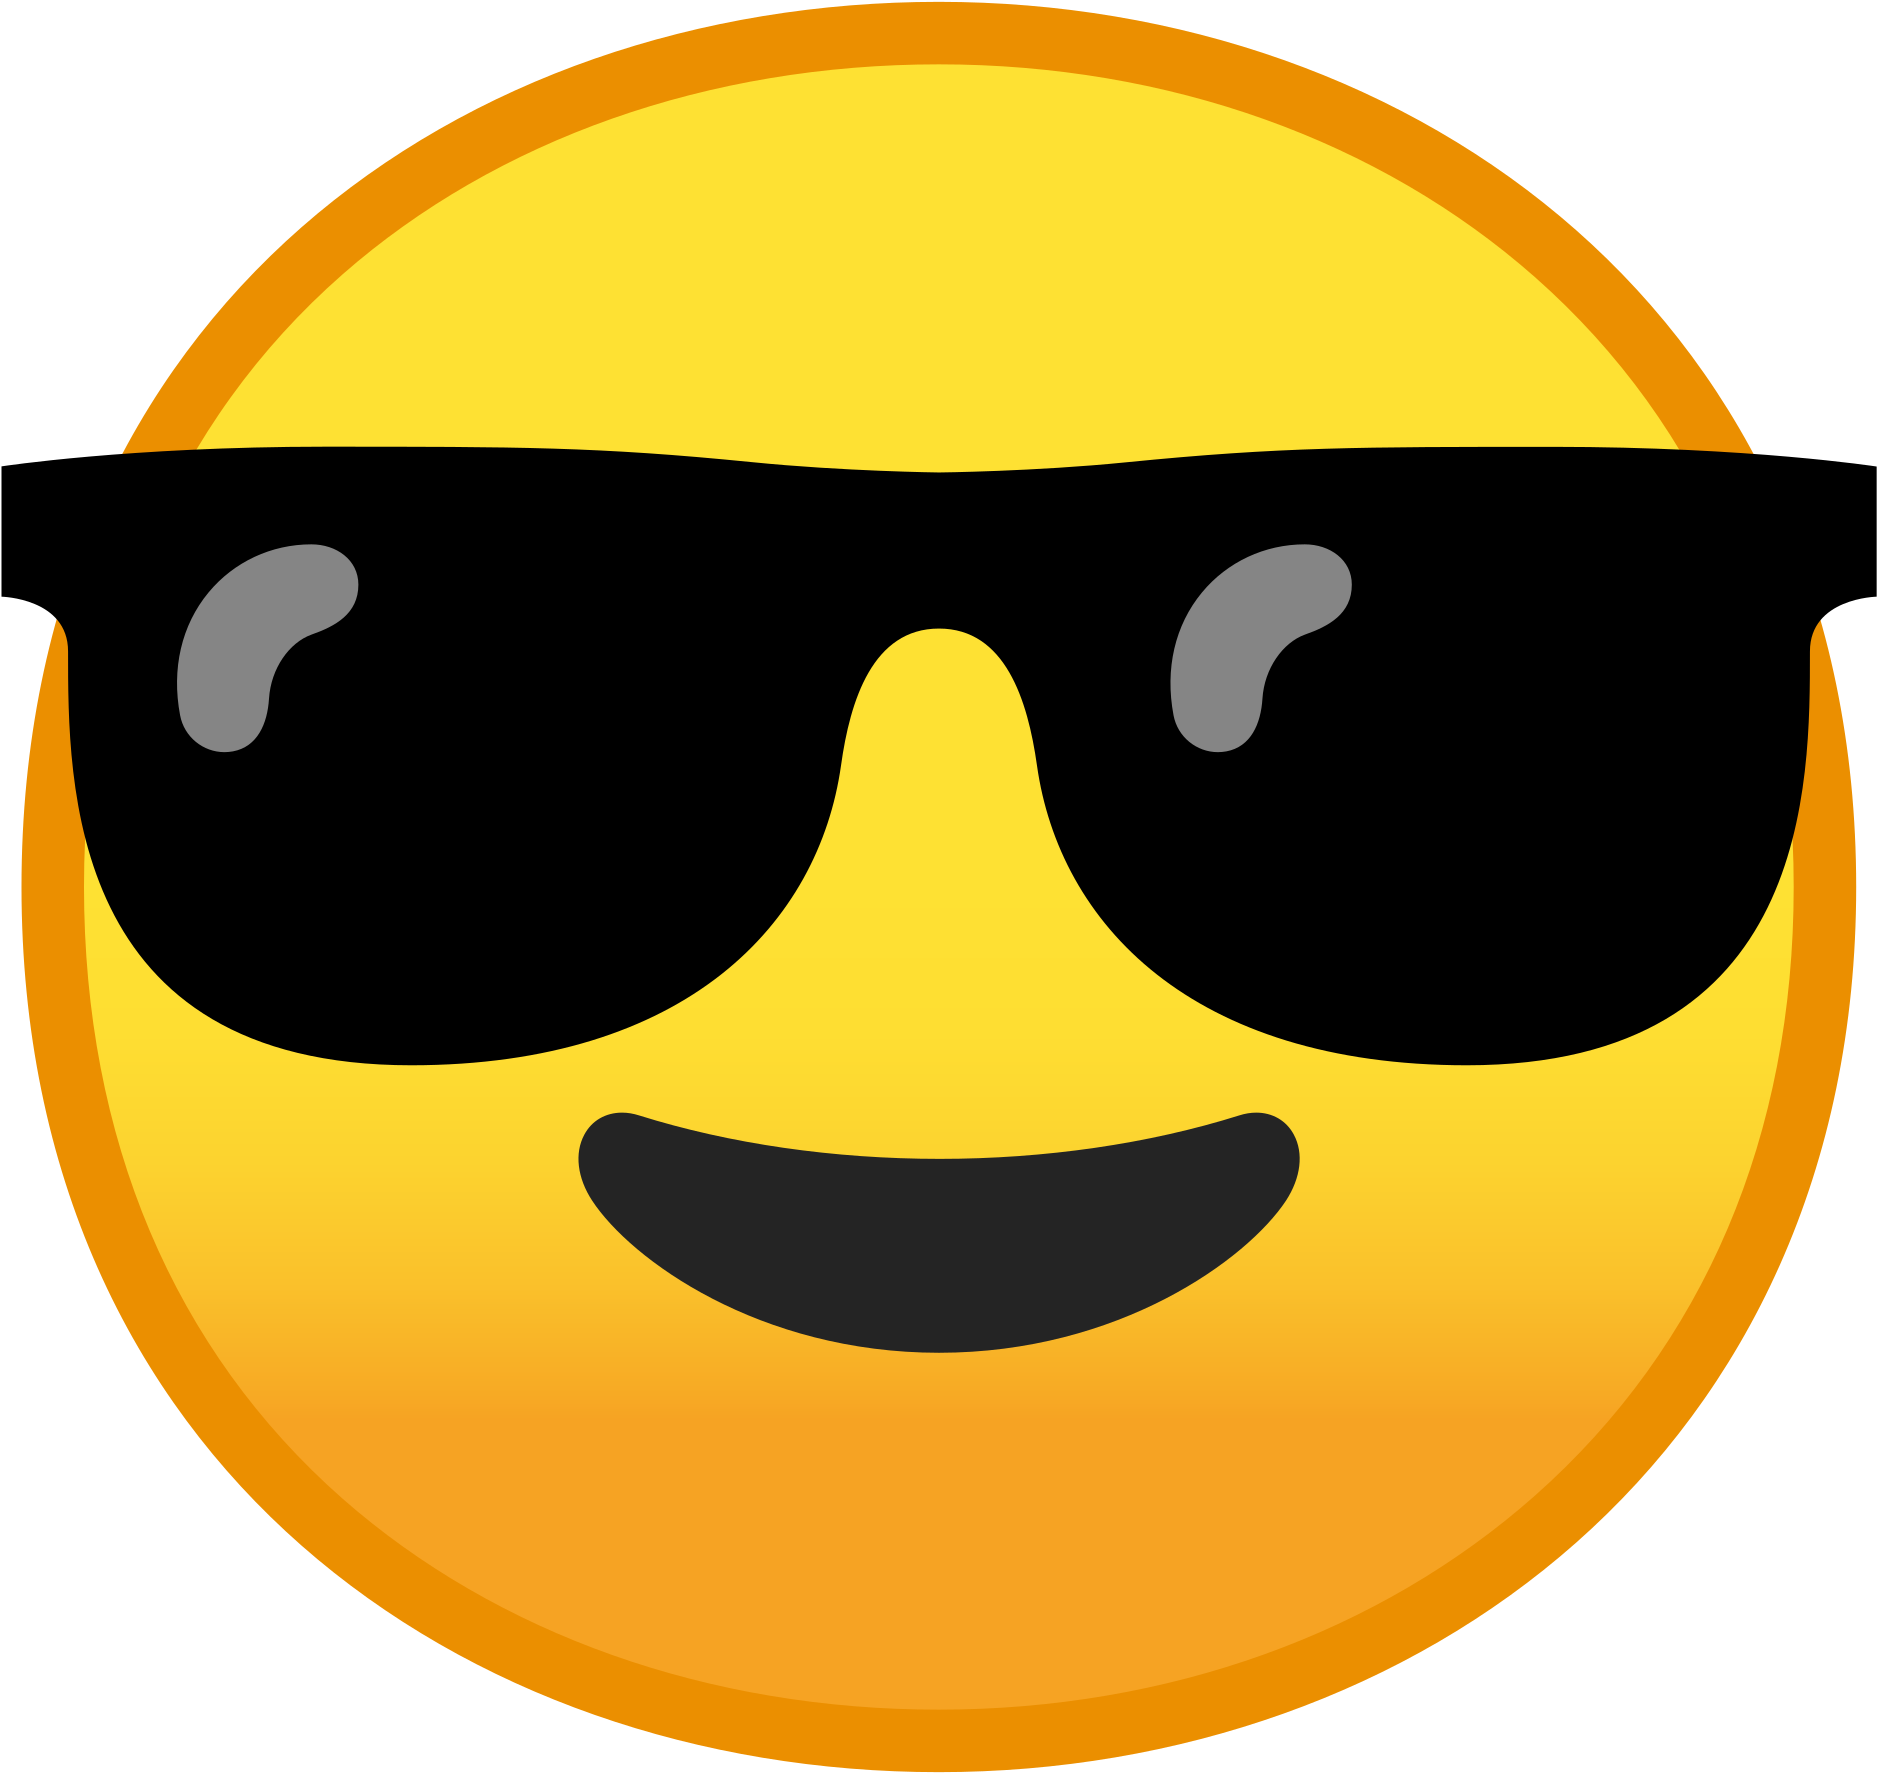 10012 Smiling Face With Sunglasses Icon - 🤐 Emoji (1024x1024)